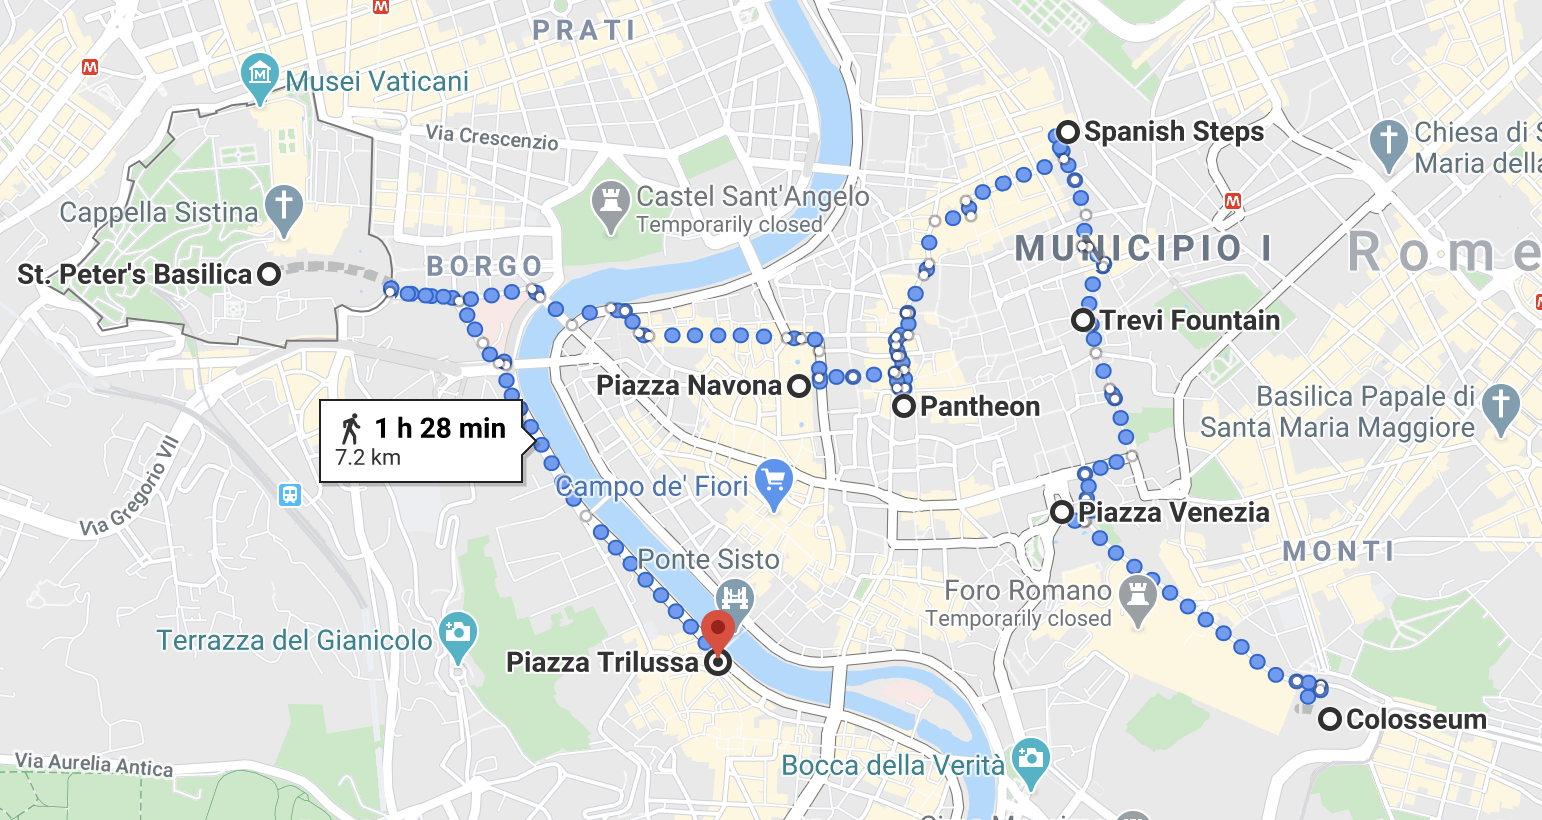 Follow this route for the ultimate self-guided walking tour of Rome.